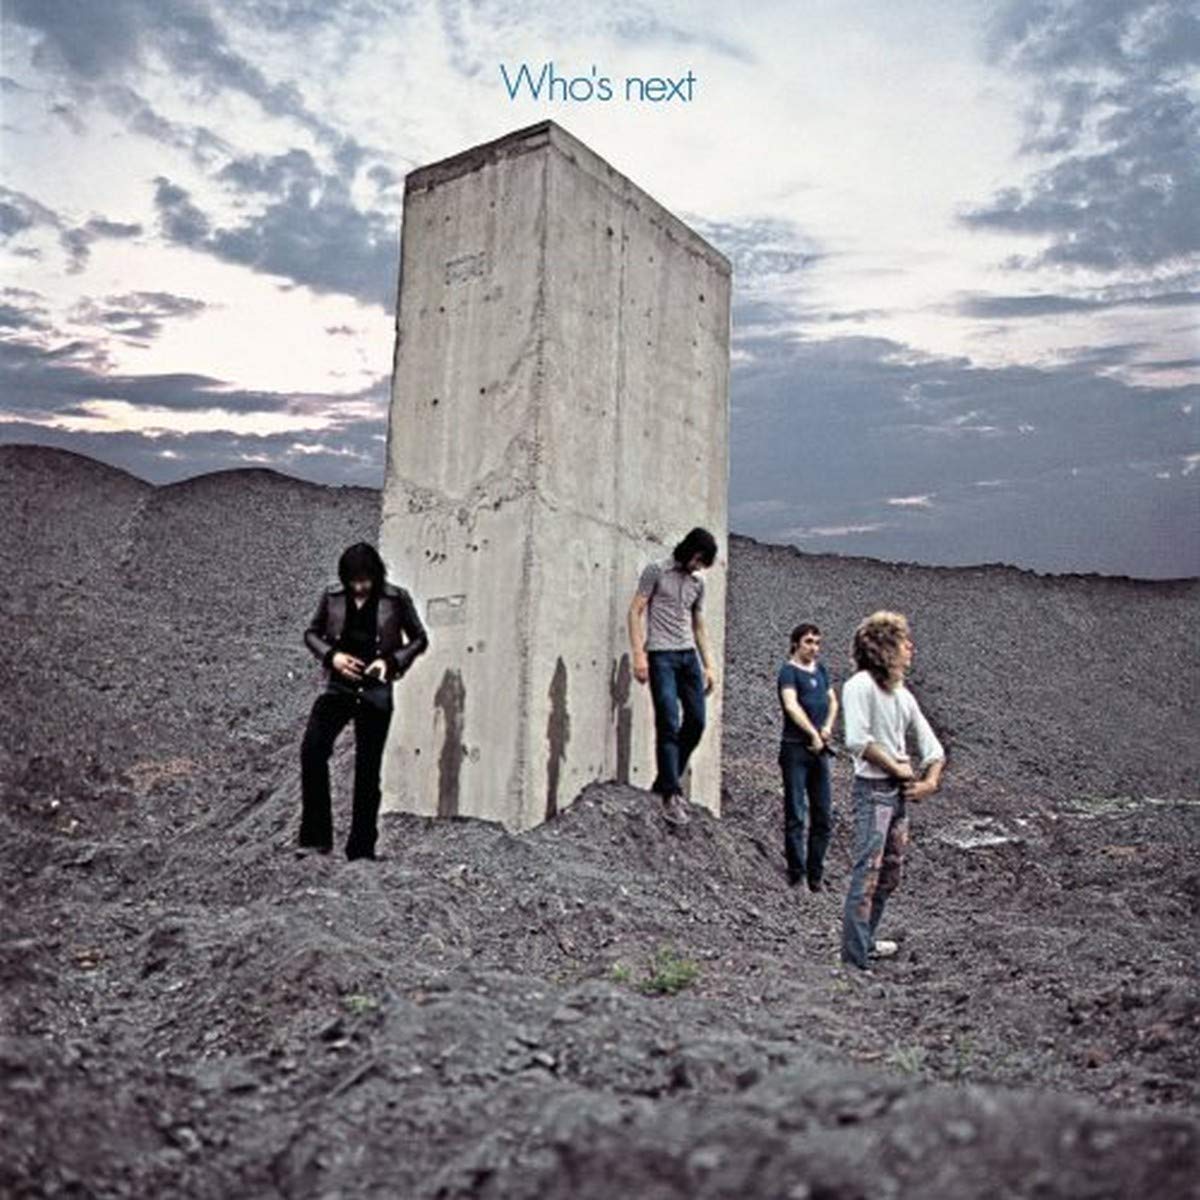 The Who - Who's Next, 1971   

They made prominent use of synthesizer on the album, particularly on 'Won't Get Fooled Again' and 'Baba O'Riley', which were both released as singles.